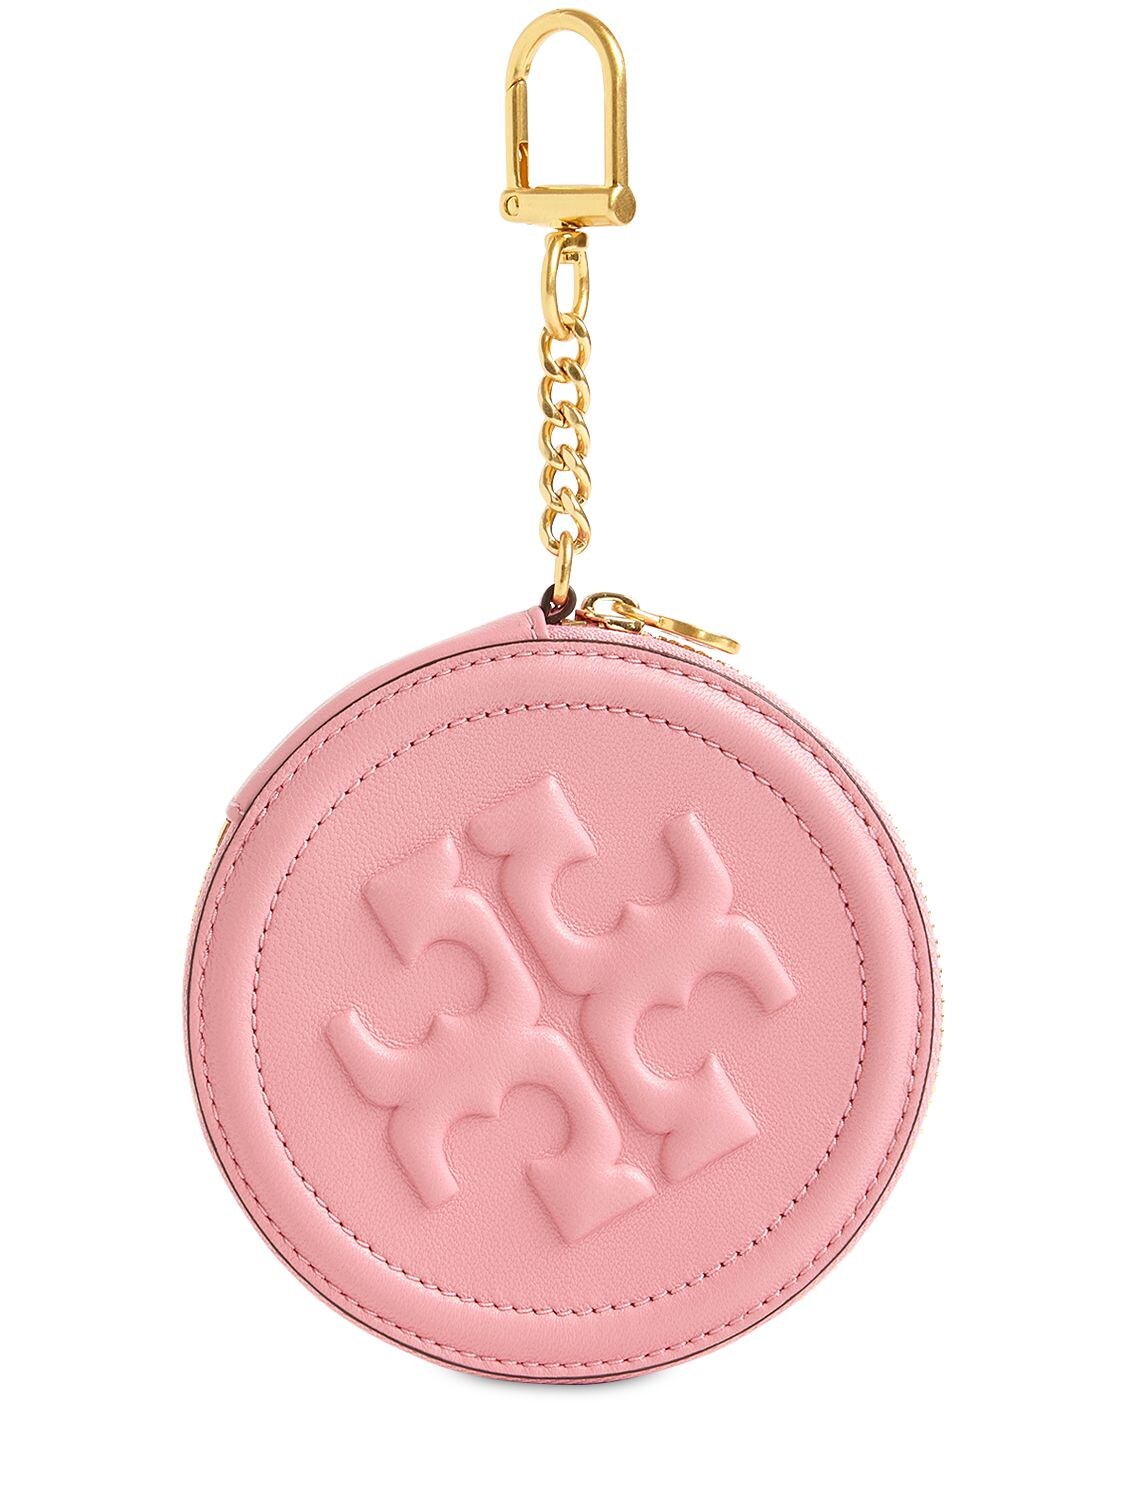 TORY BURCH FLAMING LEATHER COIN PURSE,71IM3V028-NJGX0